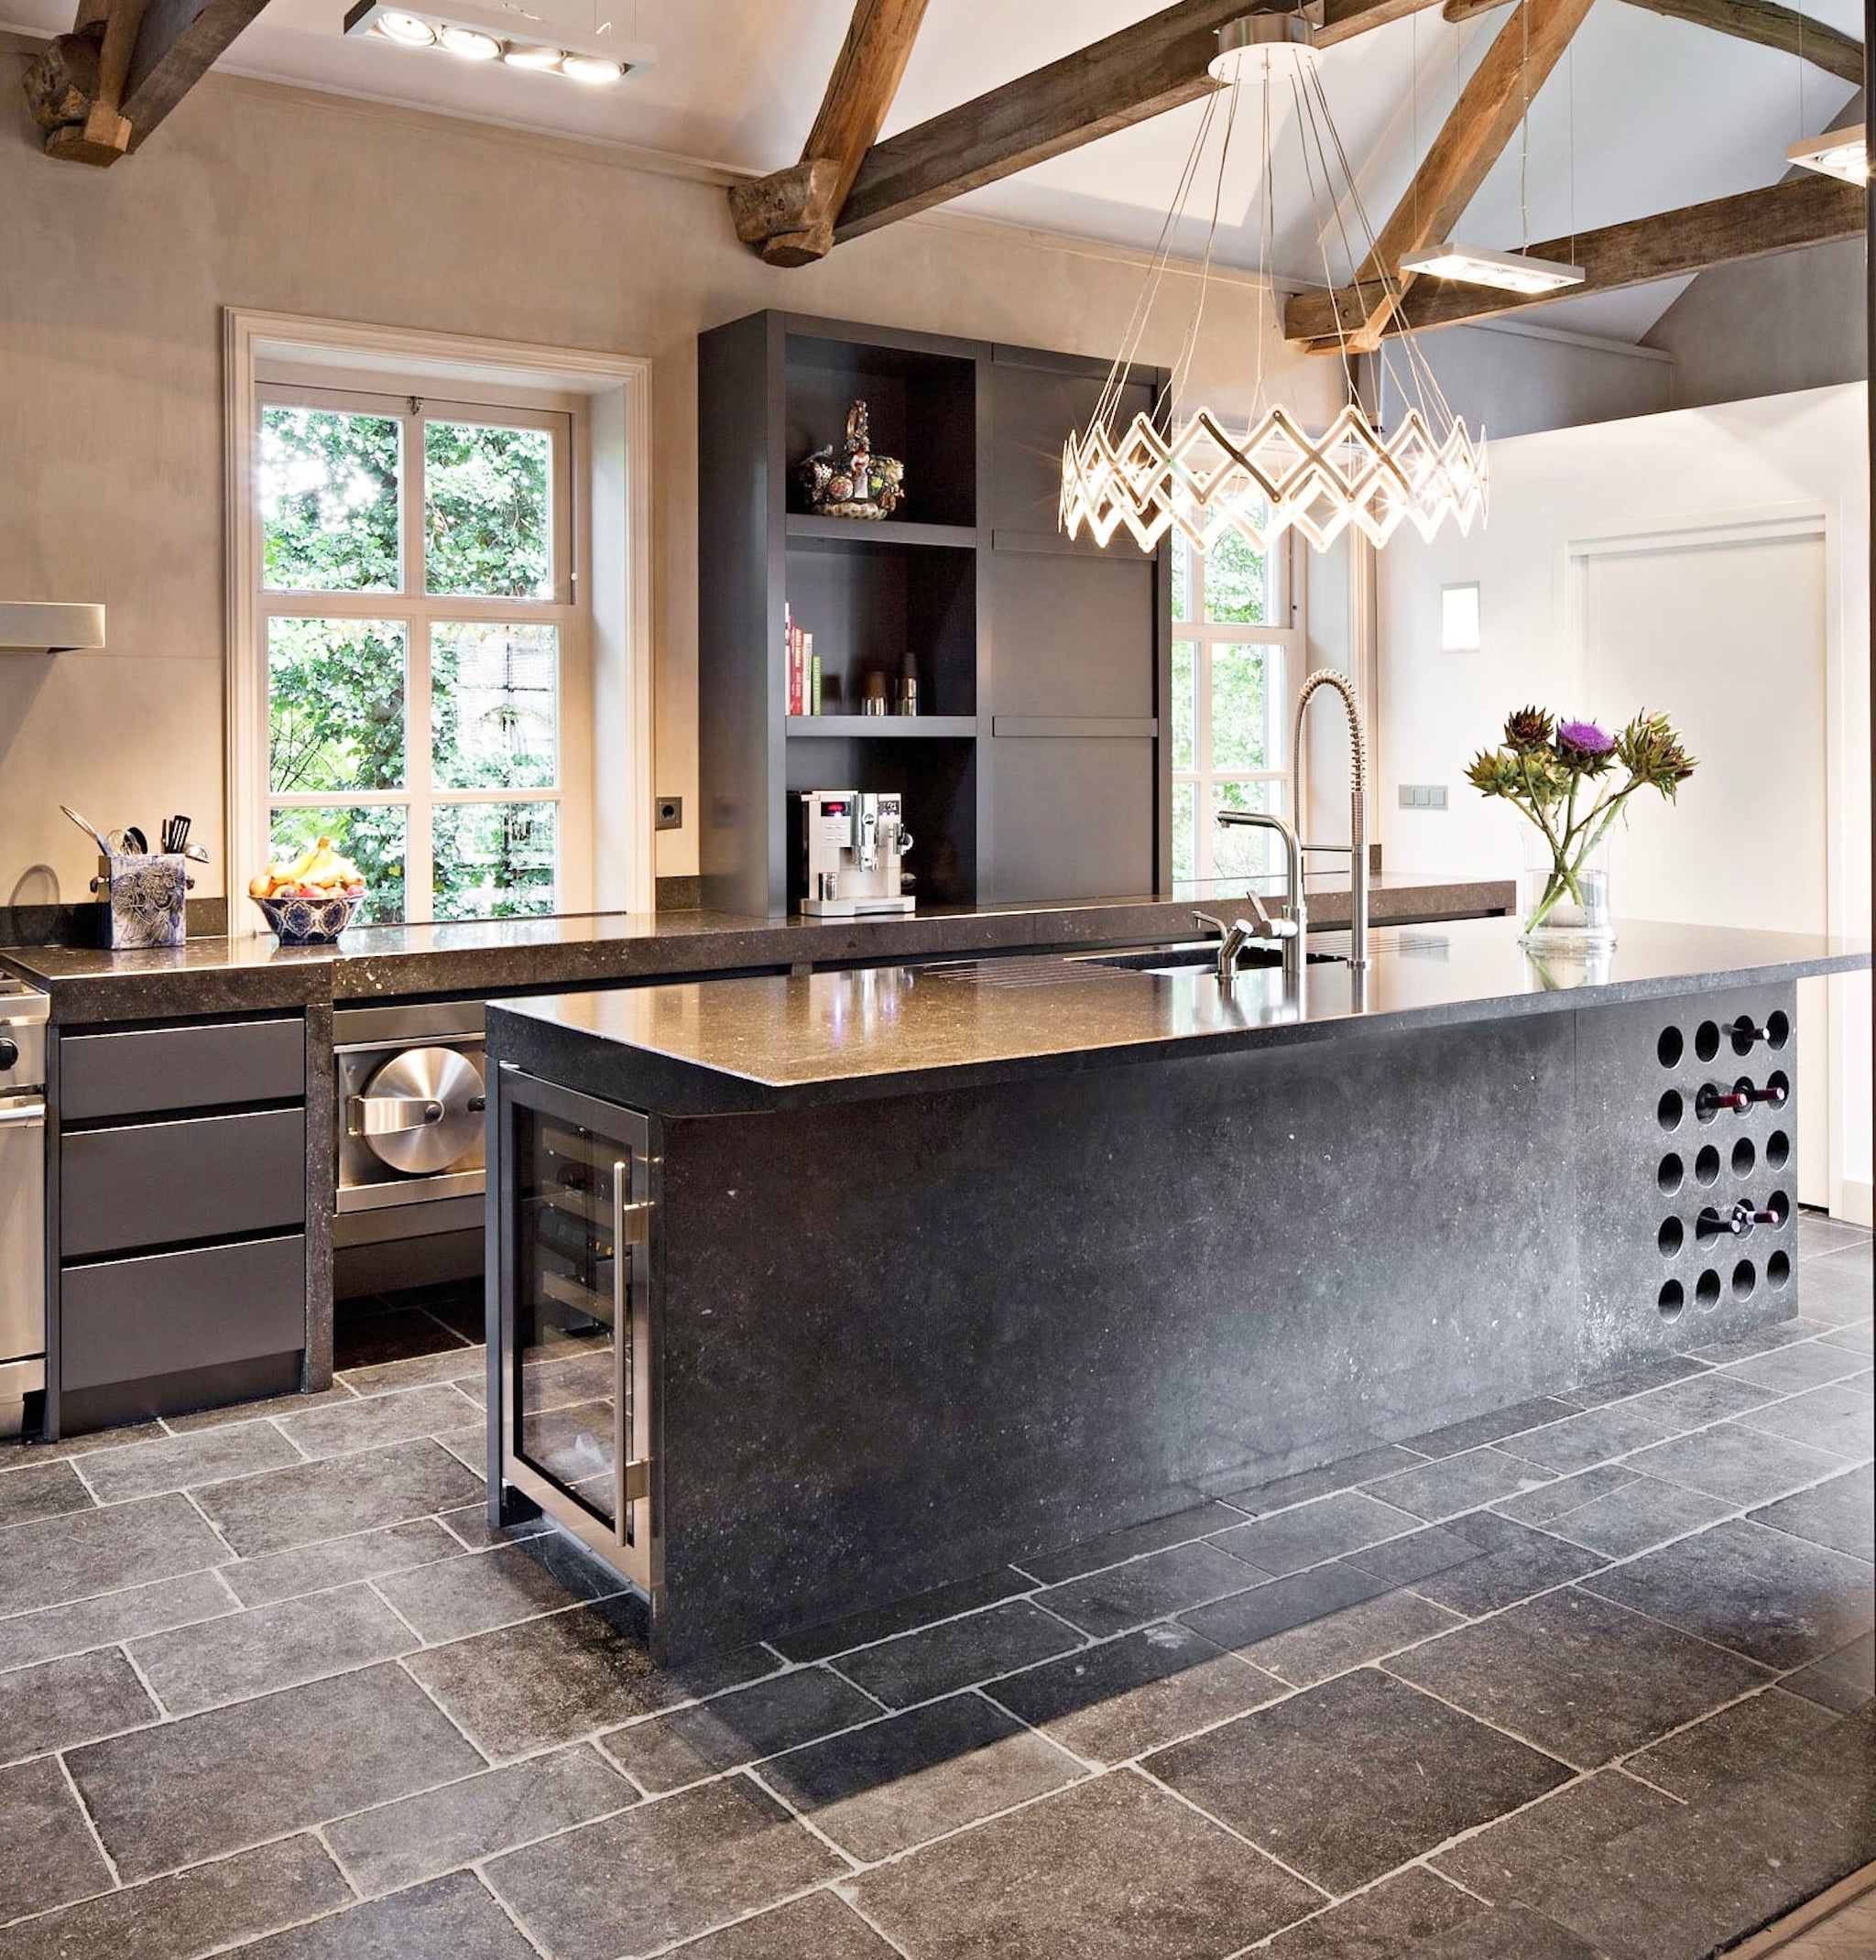 Pros and Cons of Natural Stone Flooring in Your Kitchen